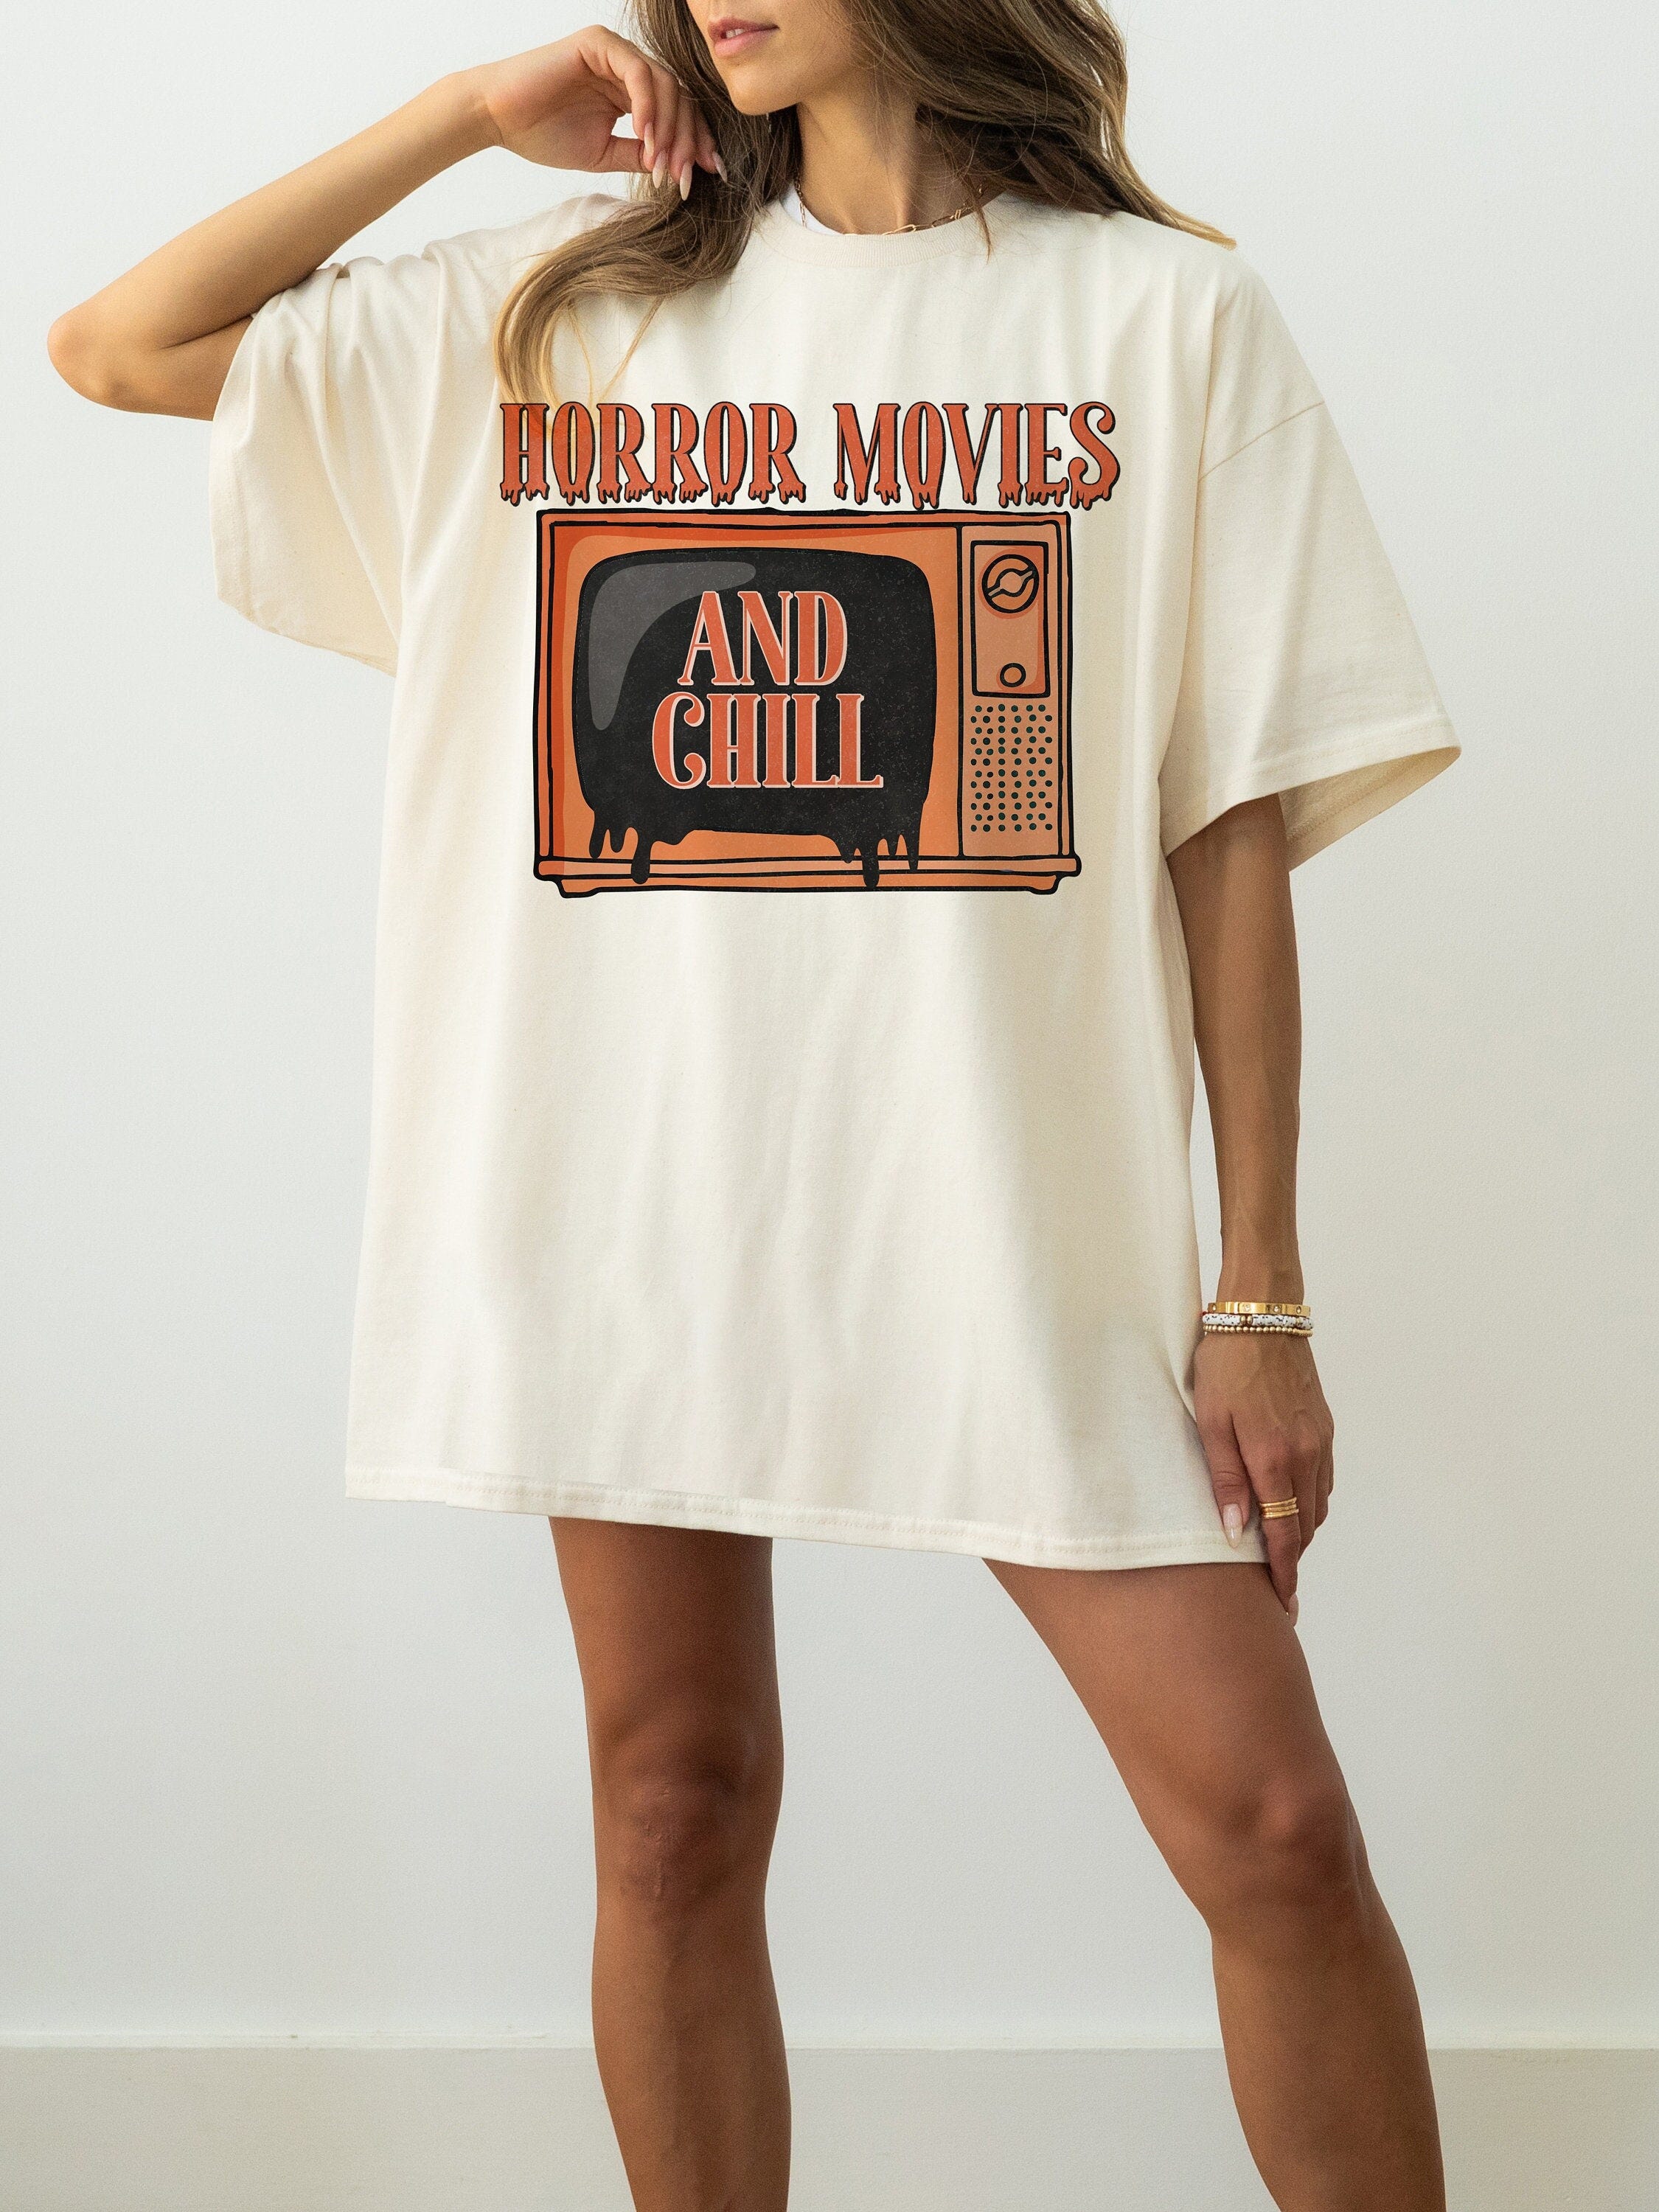 Horror Movies and Chill PNG, Trendy Halloween Designs, Halloween PNG, Spooky Vibes, Halloween Shirt Design, Sublimation Design, Digital File